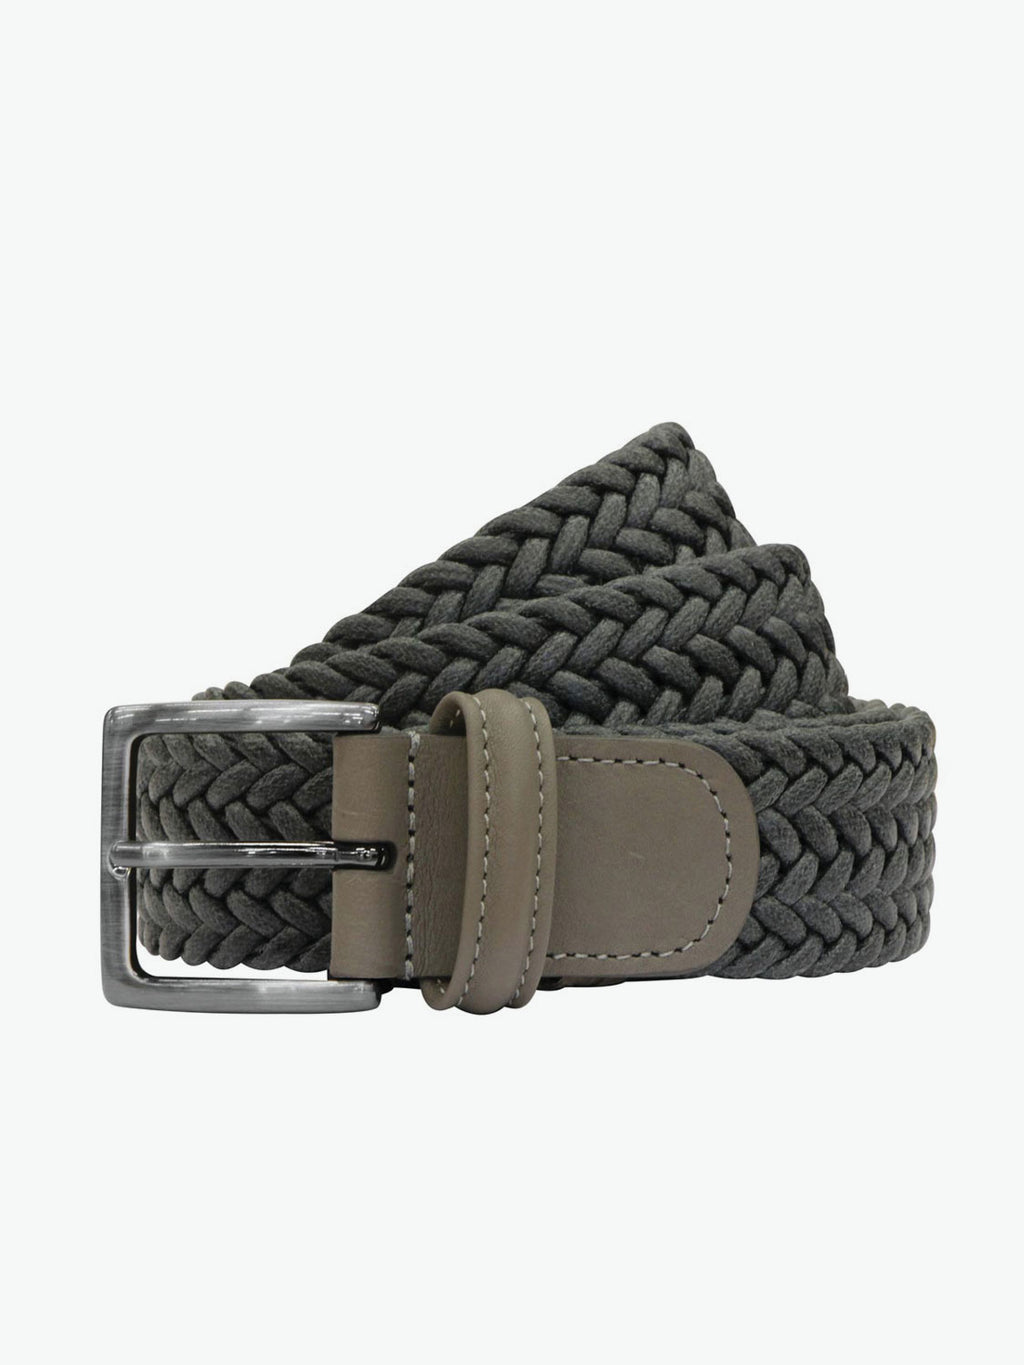 Anderson Elastic Belt - Navy and White – MENS